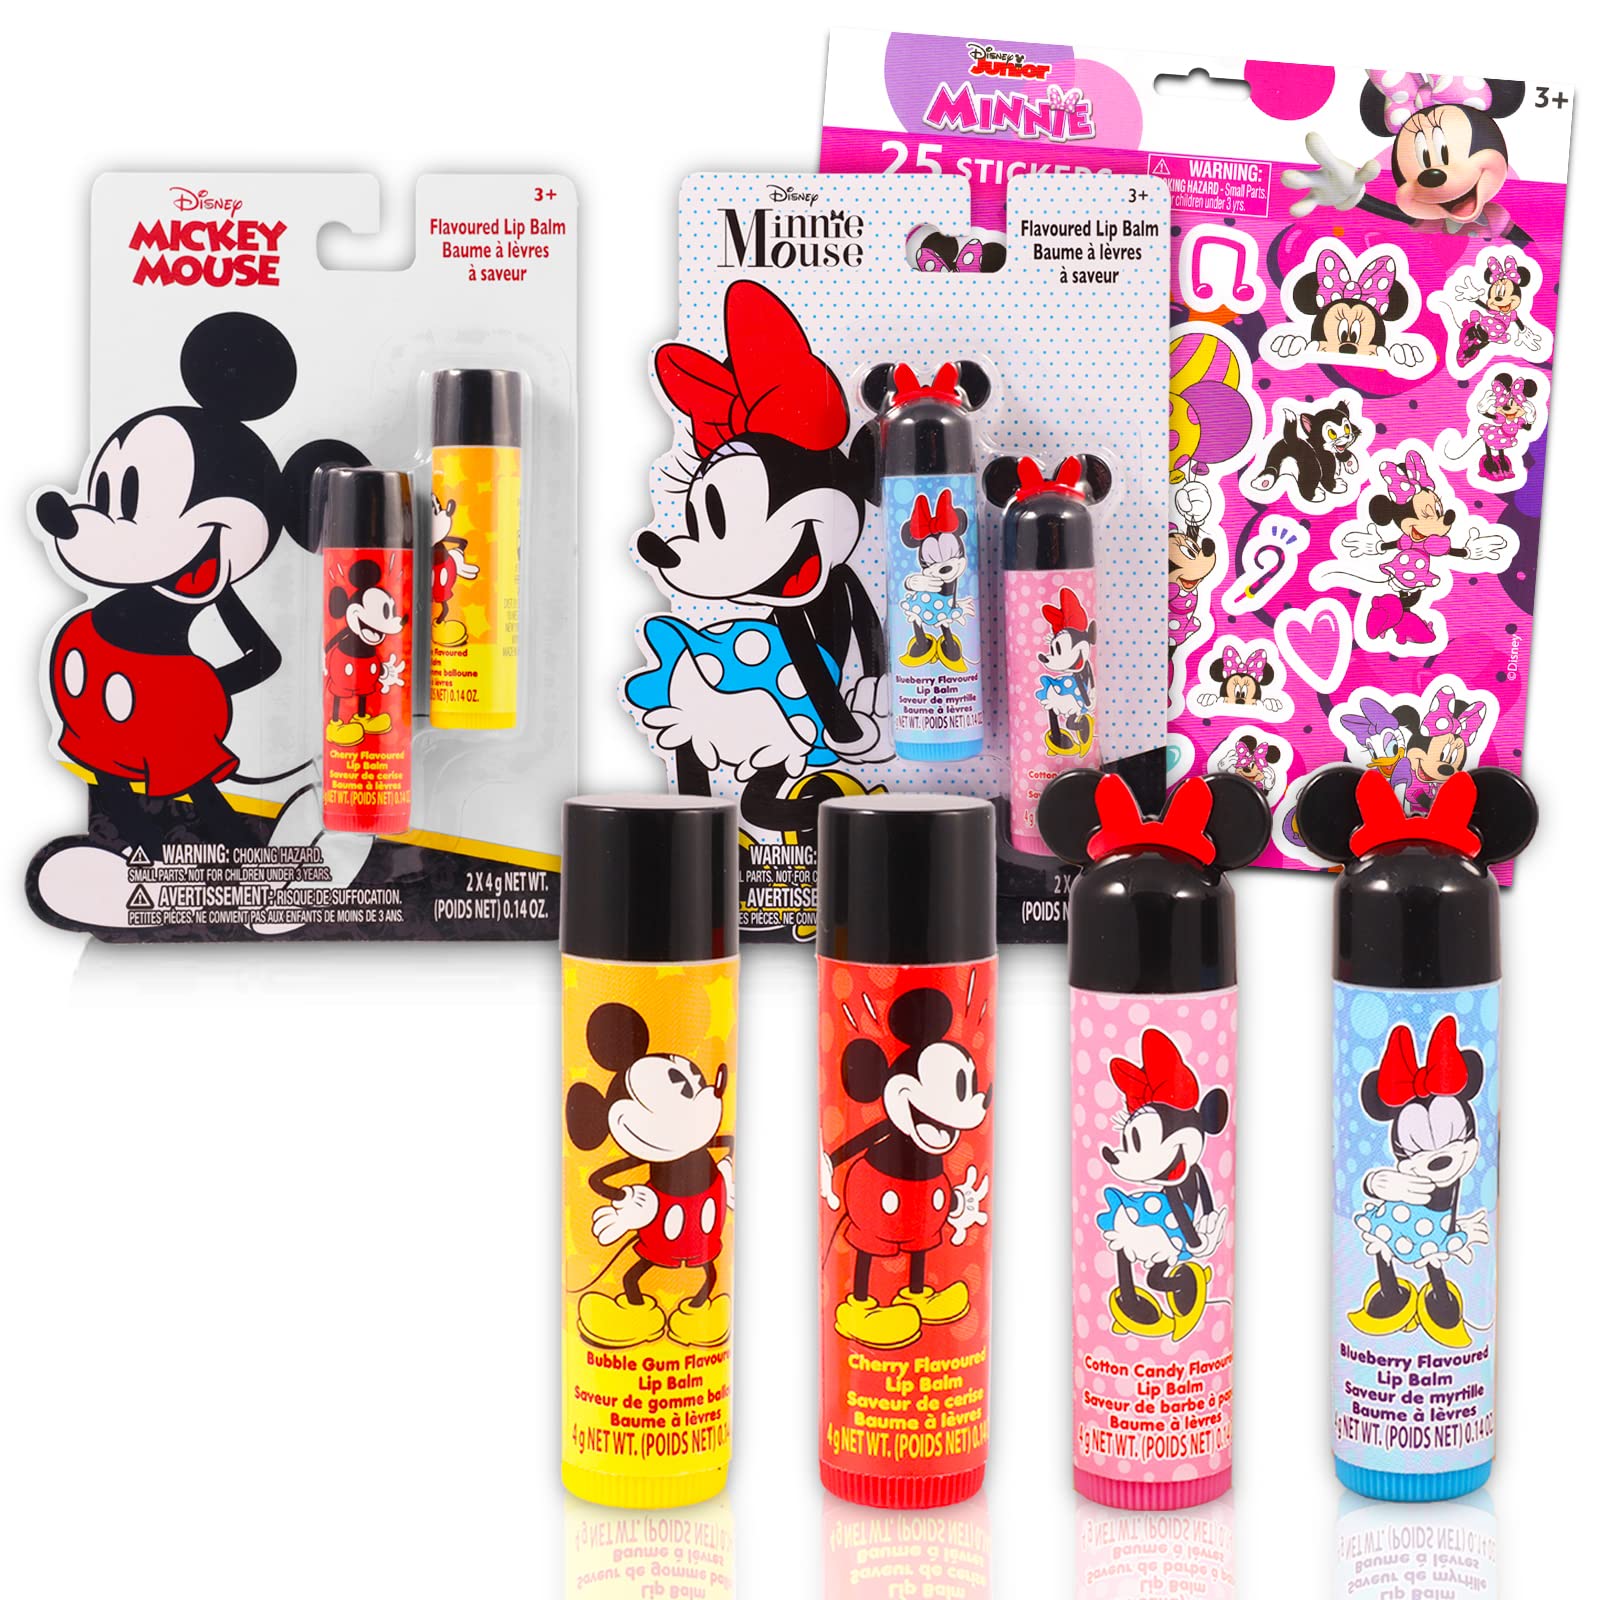 Classic Disney Disney Mickey And Minnie Mouse Lip Balm Tubes Bundle With 4 Lip Balms In